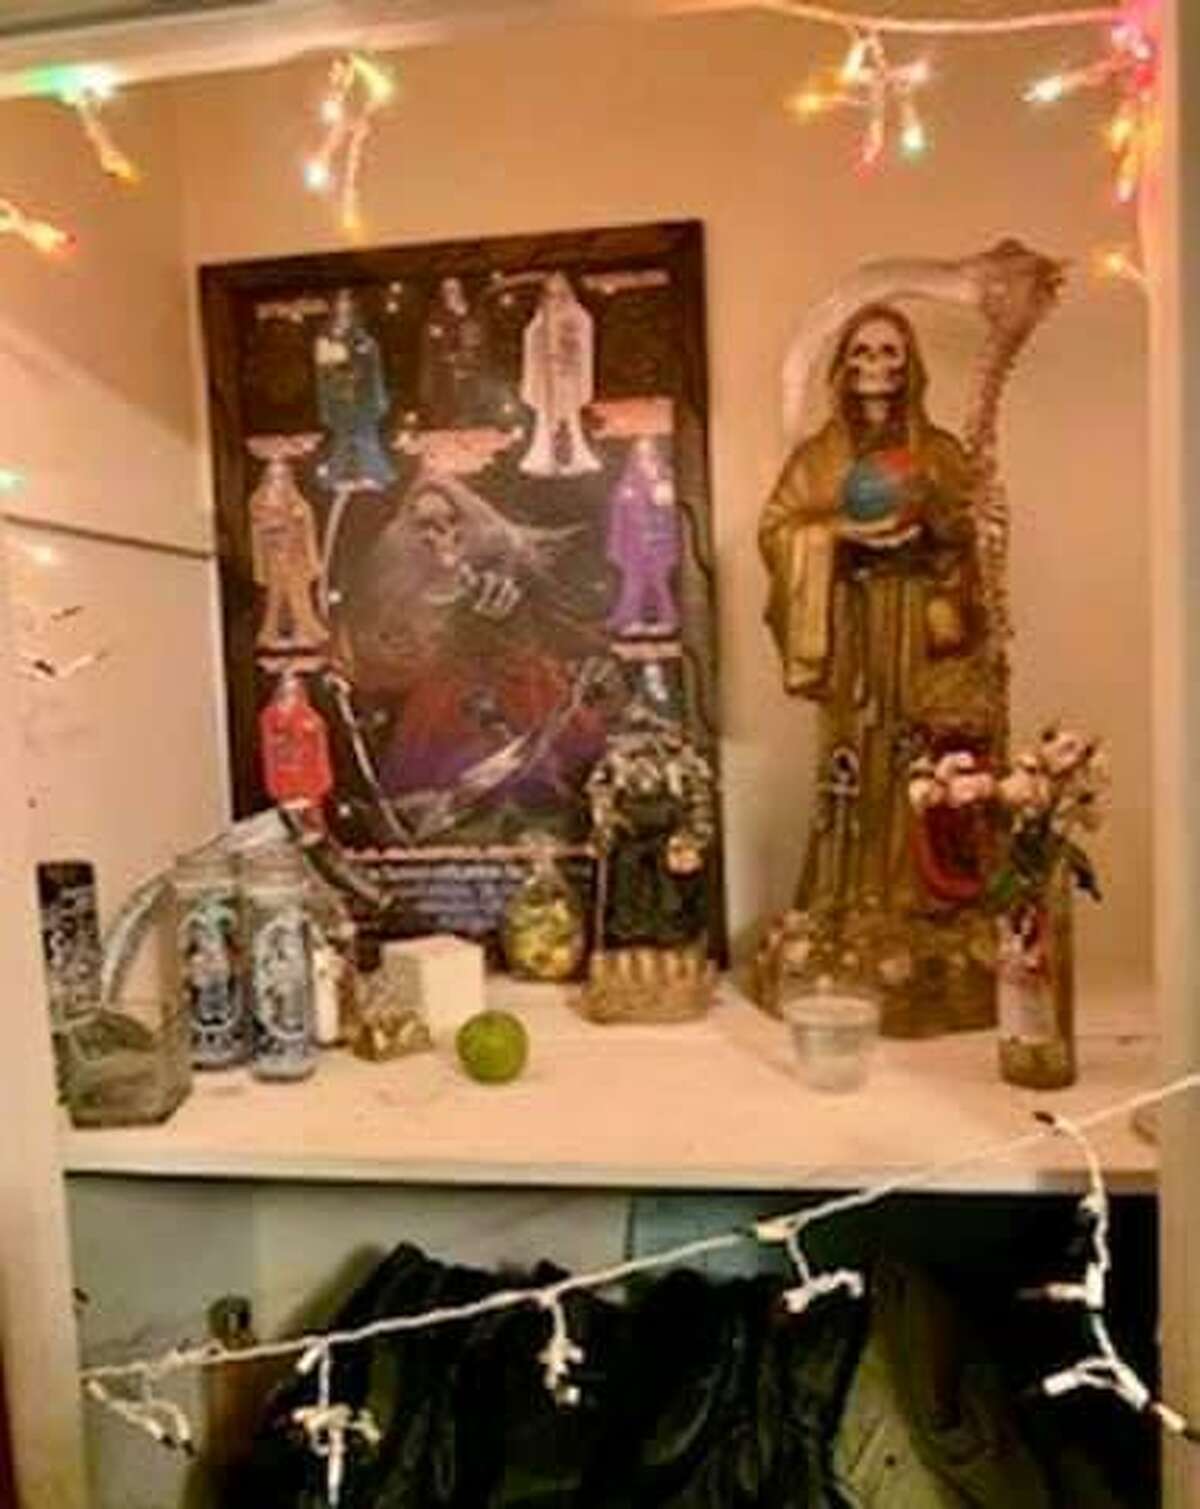 The Texas Department of Public Safety found this altar dedicated to Santa Muerte at the residence of a high-ranking member of the Mexican Mafia. He was arrested and charged with several drug possession charges.